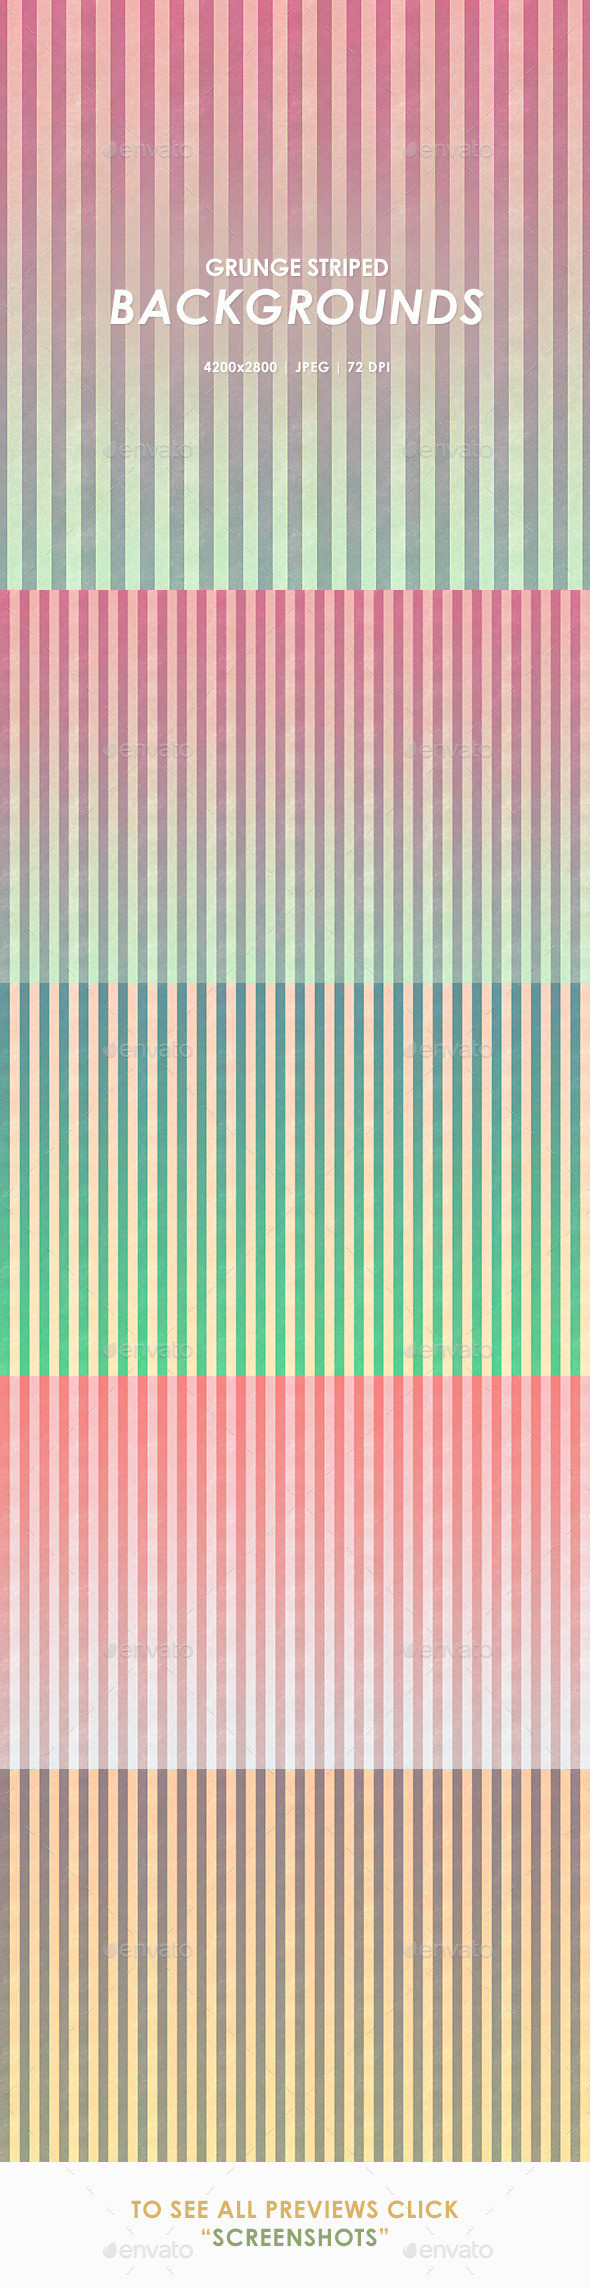 Grunge striped backgrounds preview